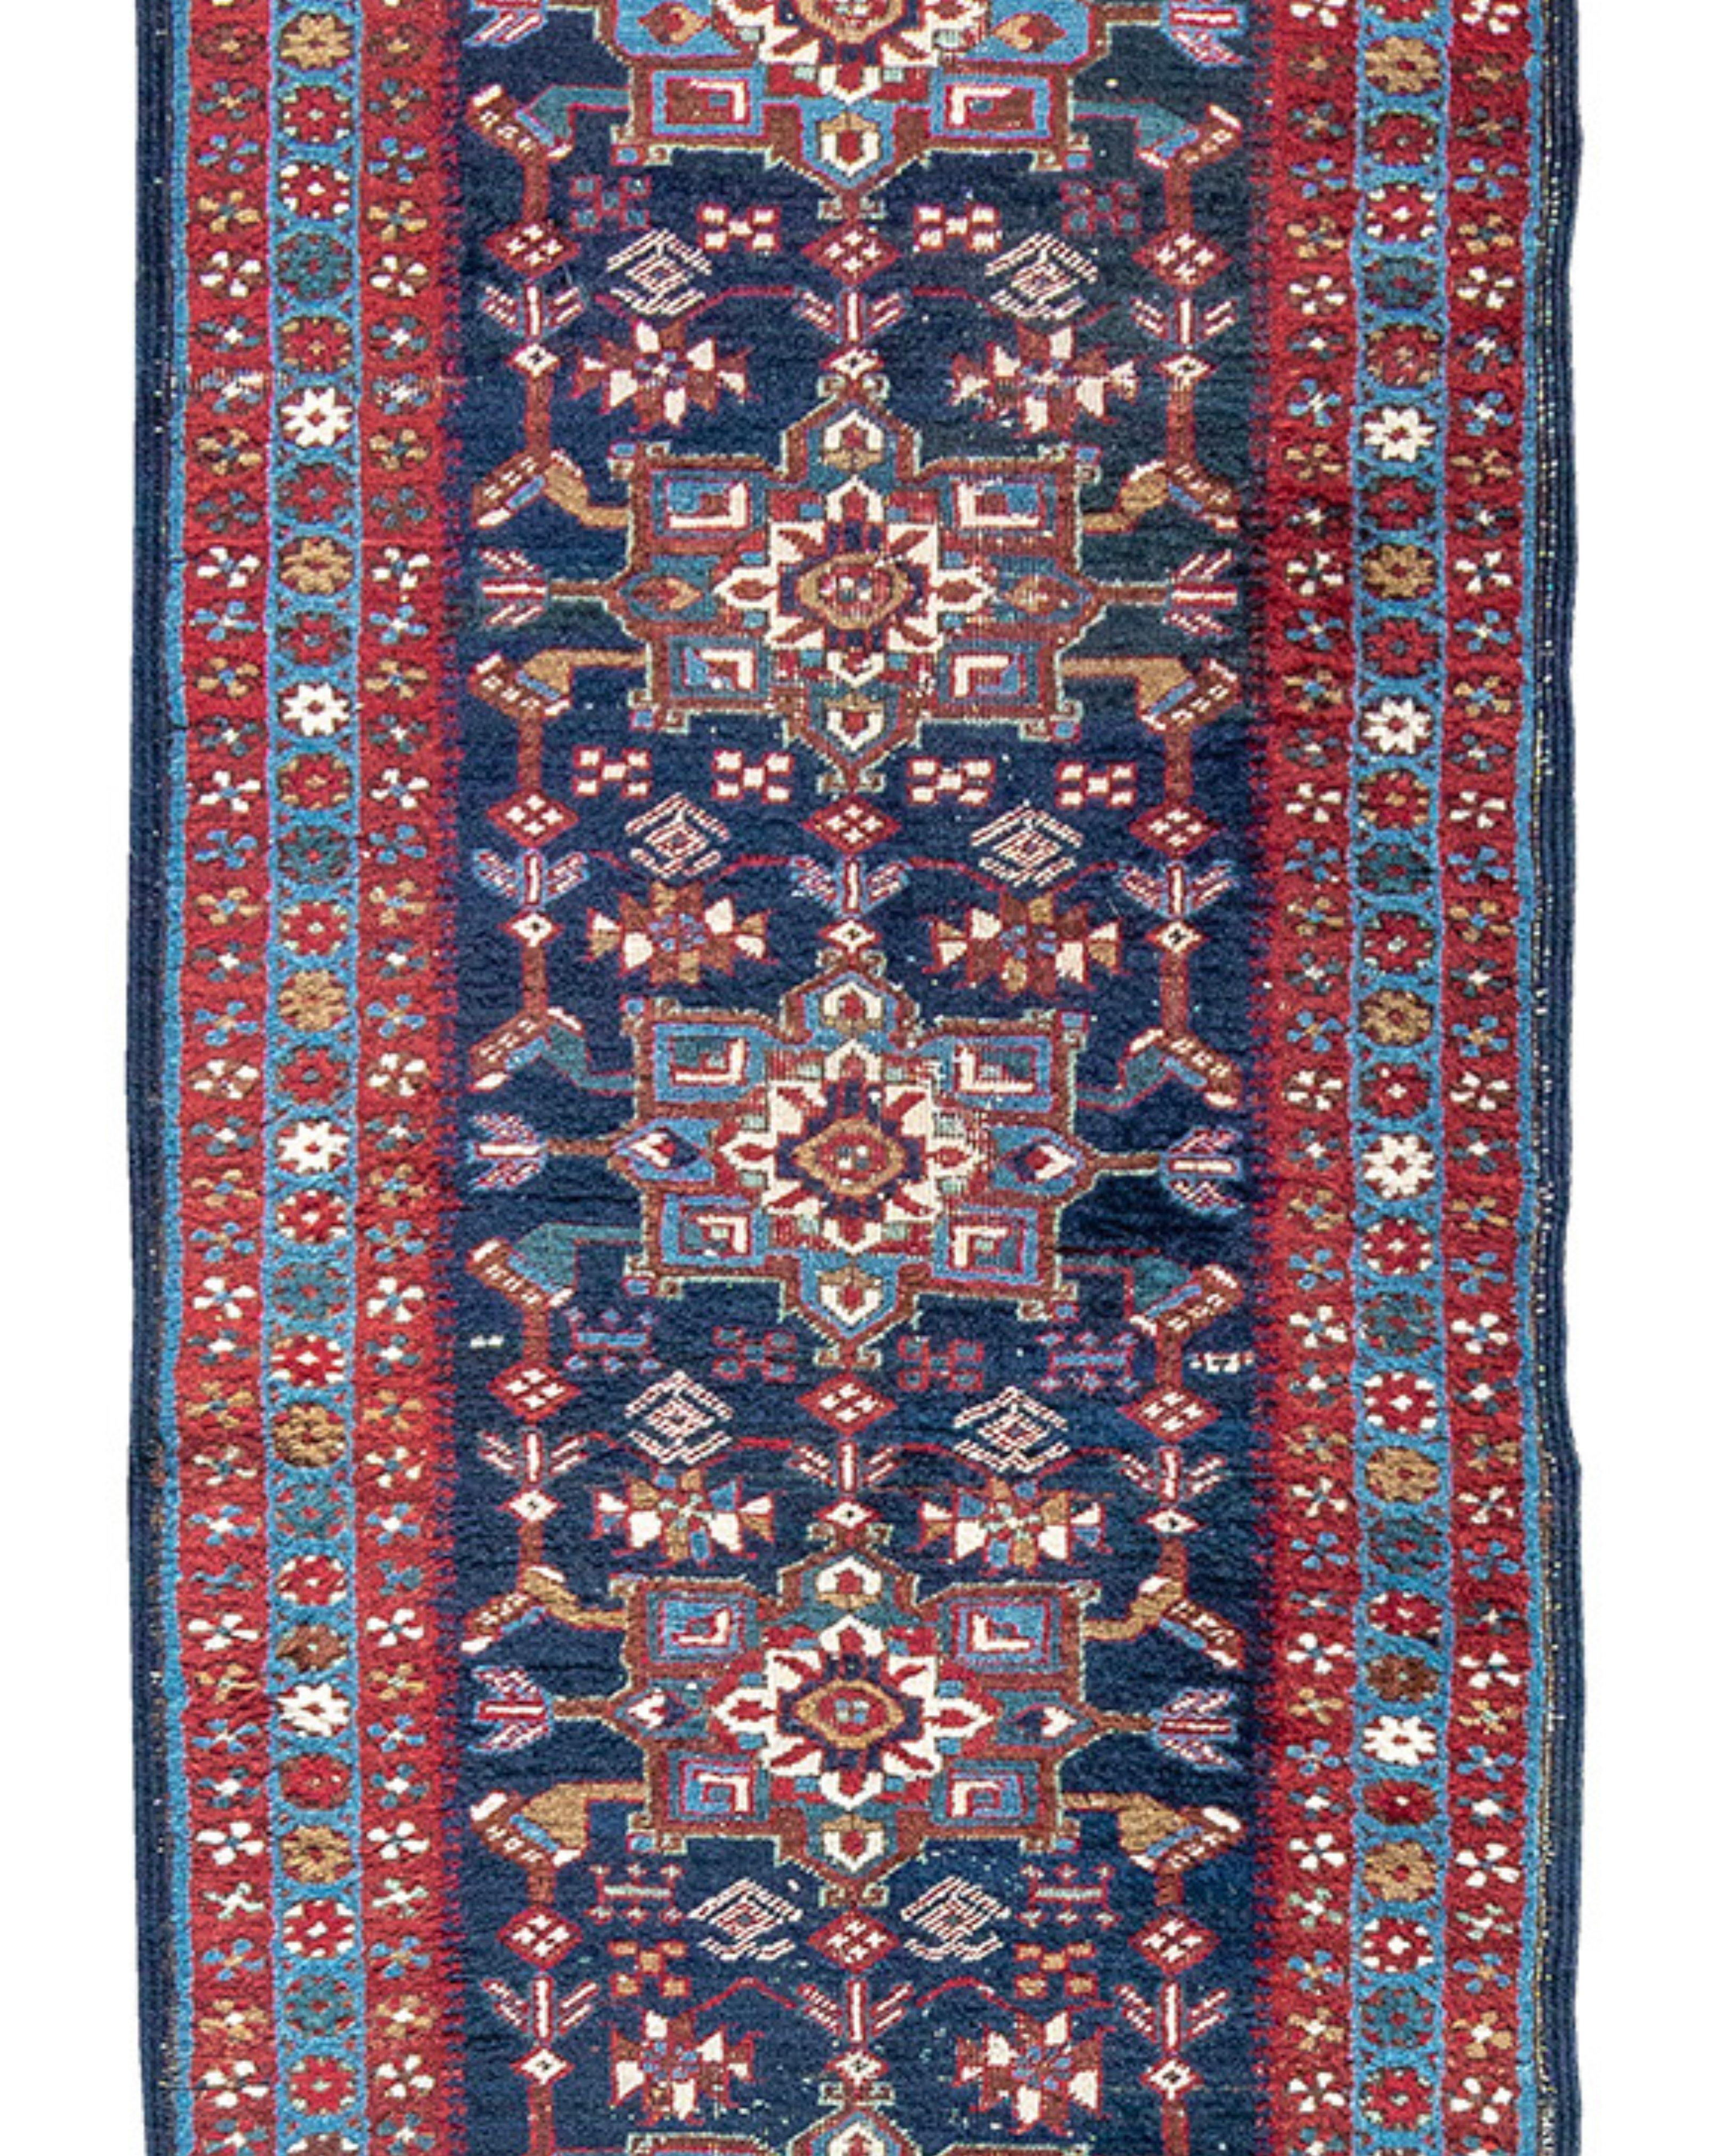 Antique Persian Heriz Runner Rug, Early 20th Century In Good Condition For Sale In San Francisco, CA